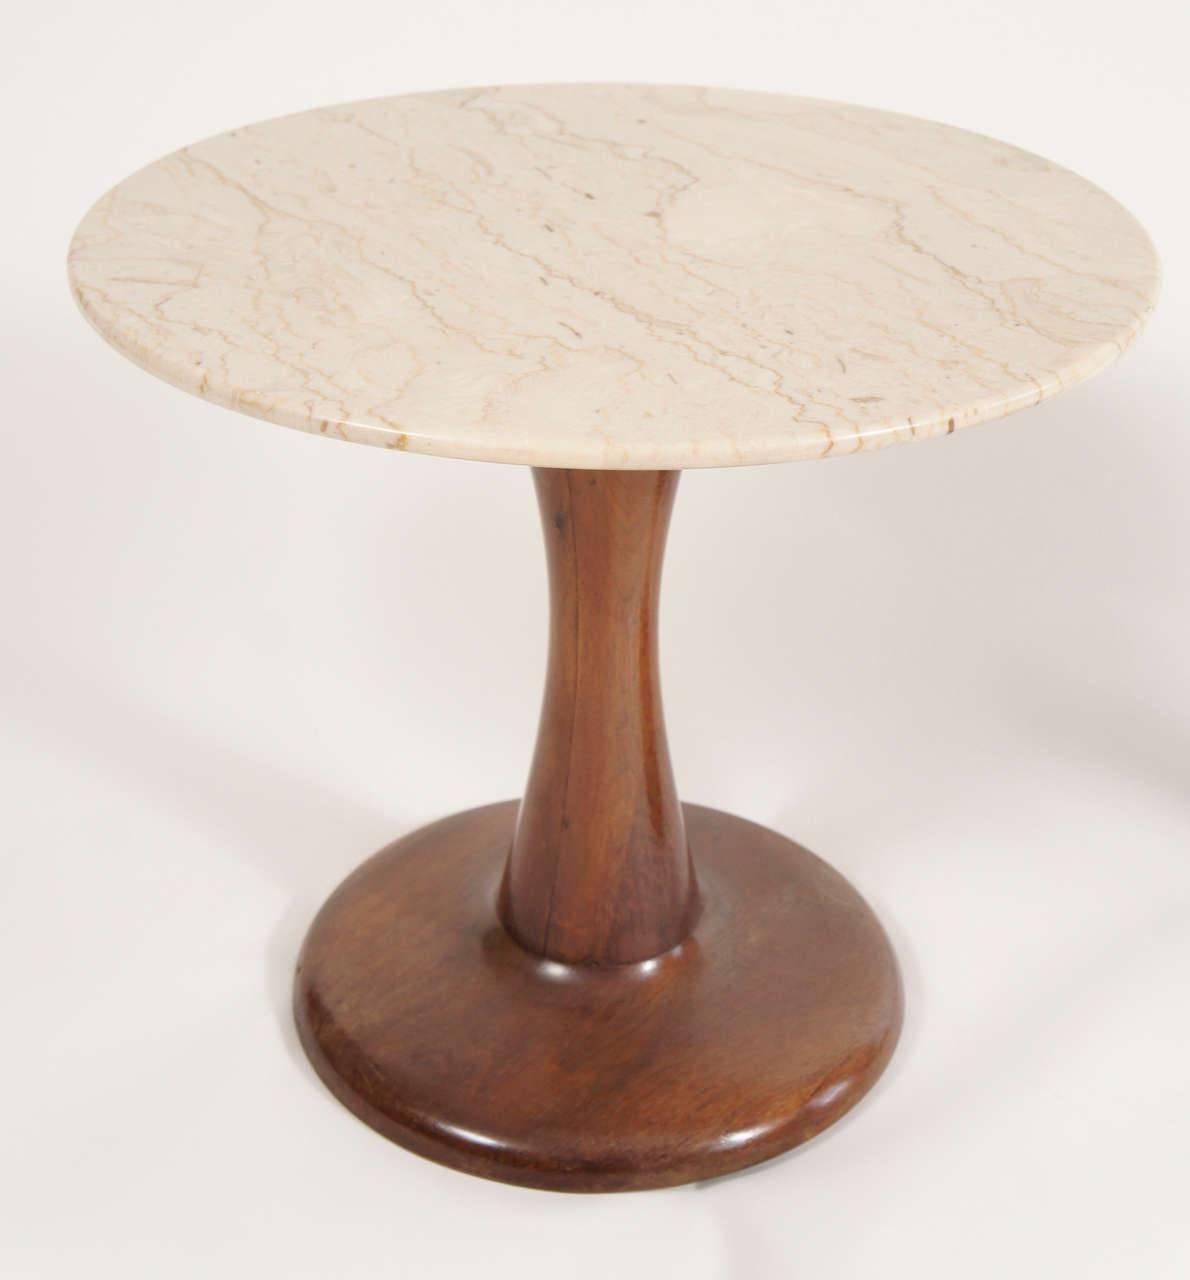 Stunning pair of Danish side tables that will work well in a modern home. The walnut bases have a rich and shapely form. The marble tops are a soft color that will not compete with other items in the room. A simply elegant solution with a small